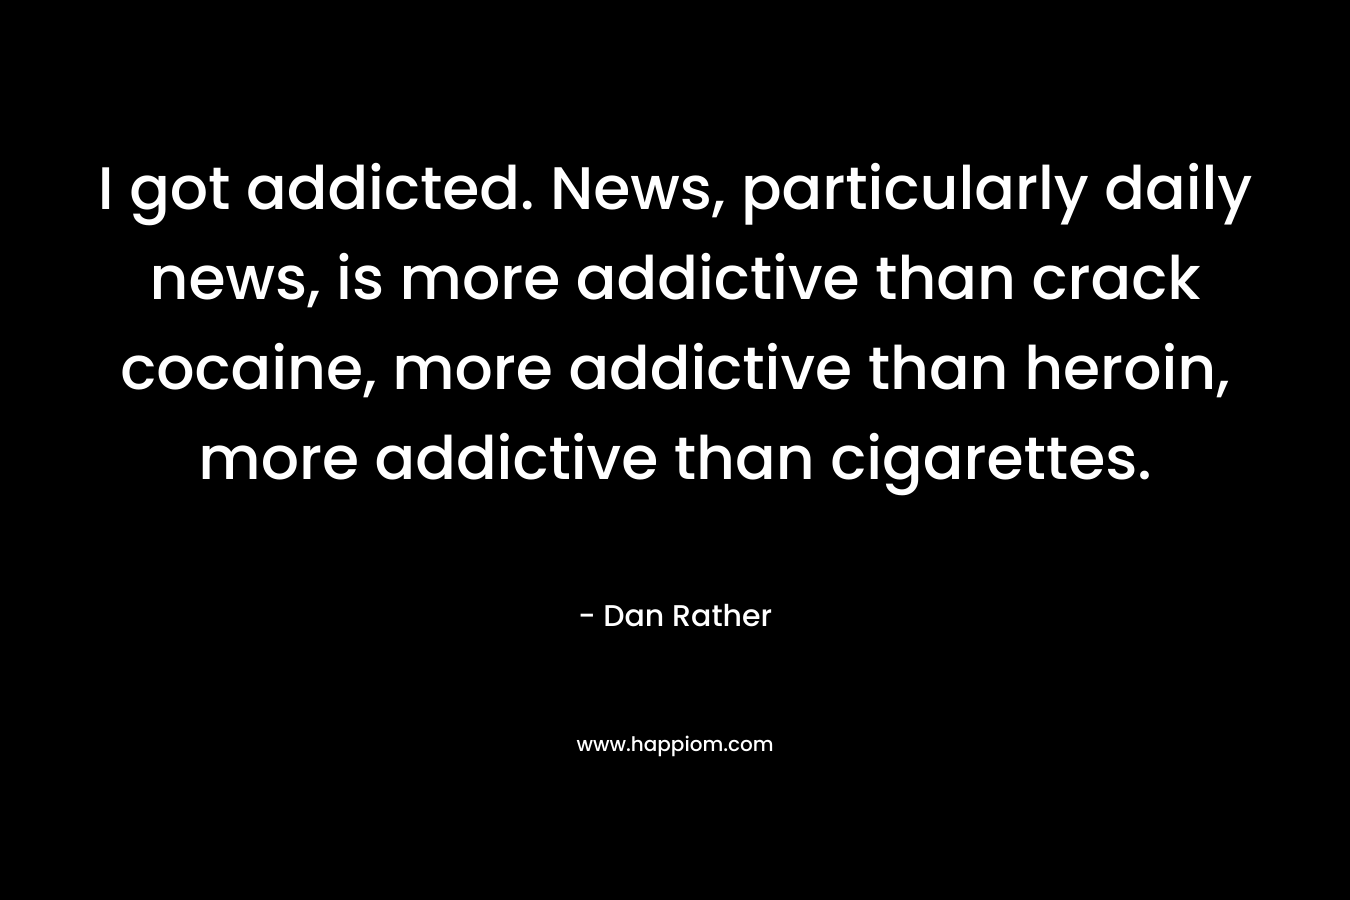 I got addicted. News, particularly daily news, is more addictive than crack cocaine, more addictive than heroin, more addictive than cigarettes.  – Dan Rather